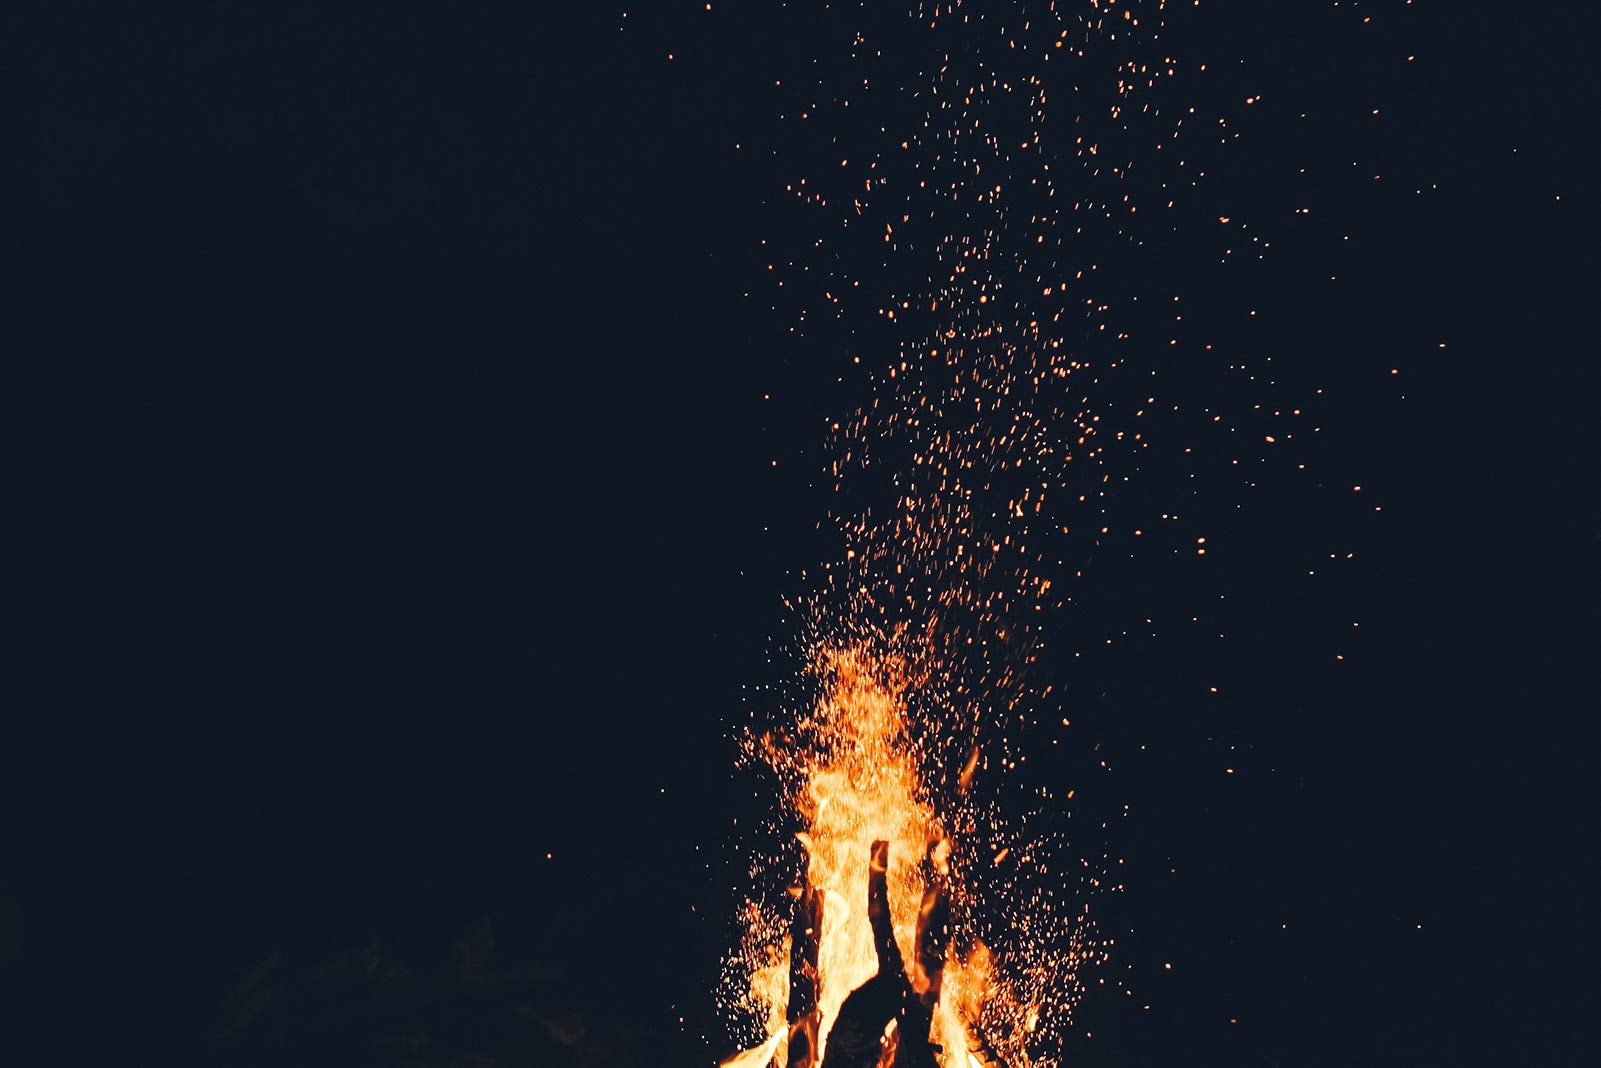 A large fire burning in the dark with sparks rising into the night sky.